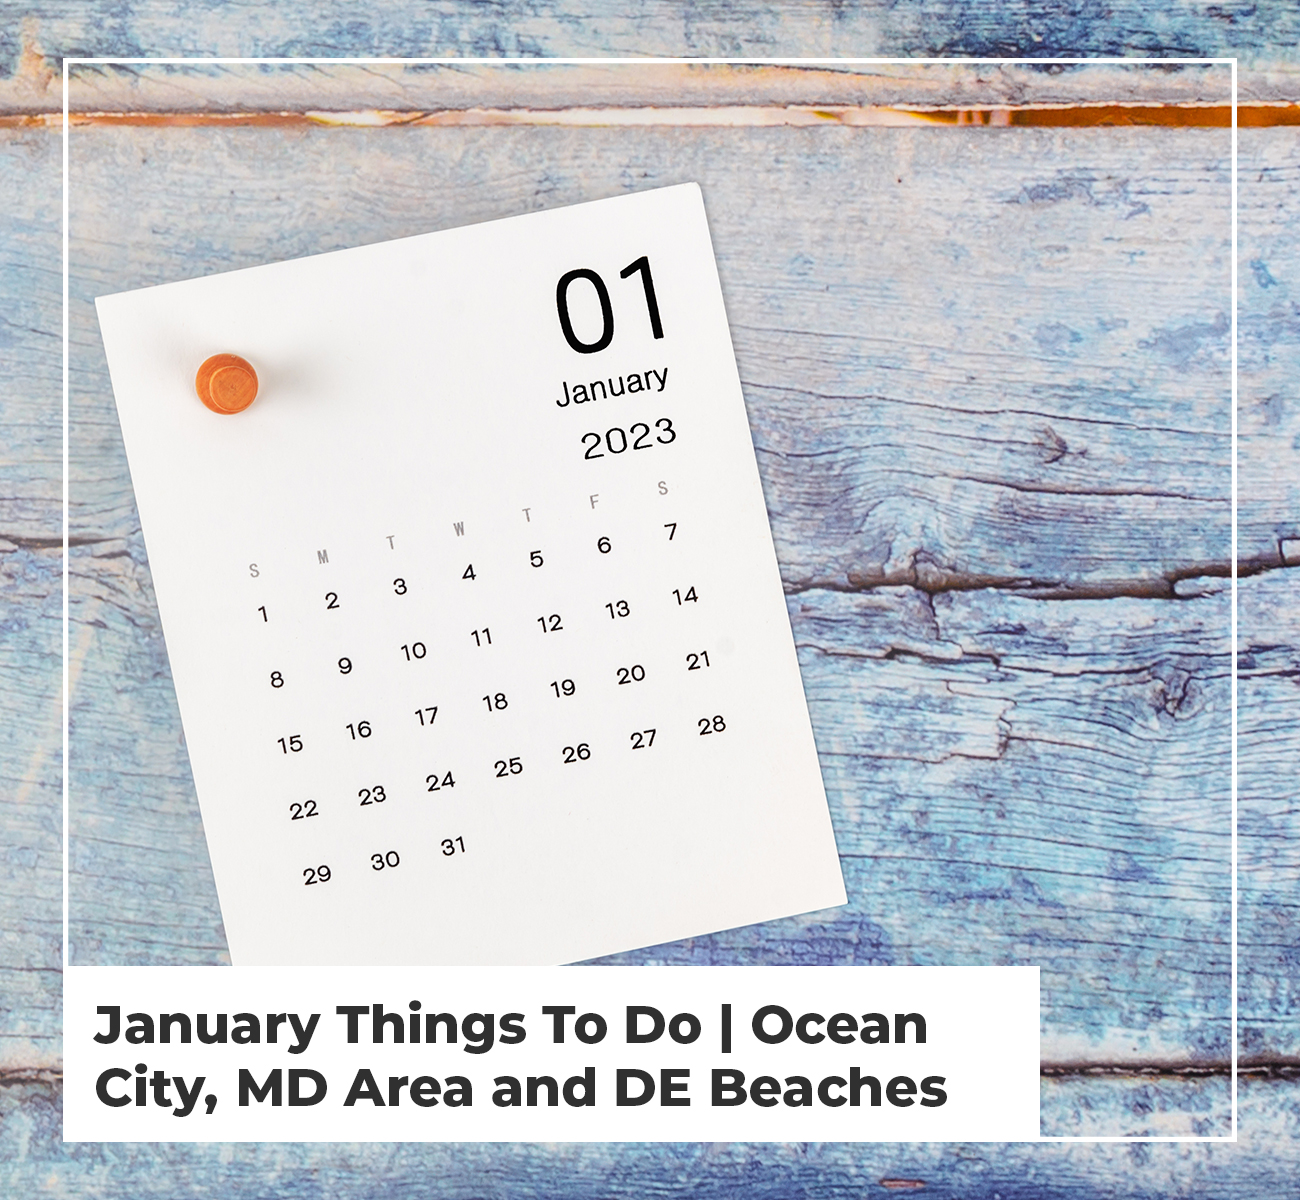 January Things To Do - Ocean City, MD Area and DE Beaches